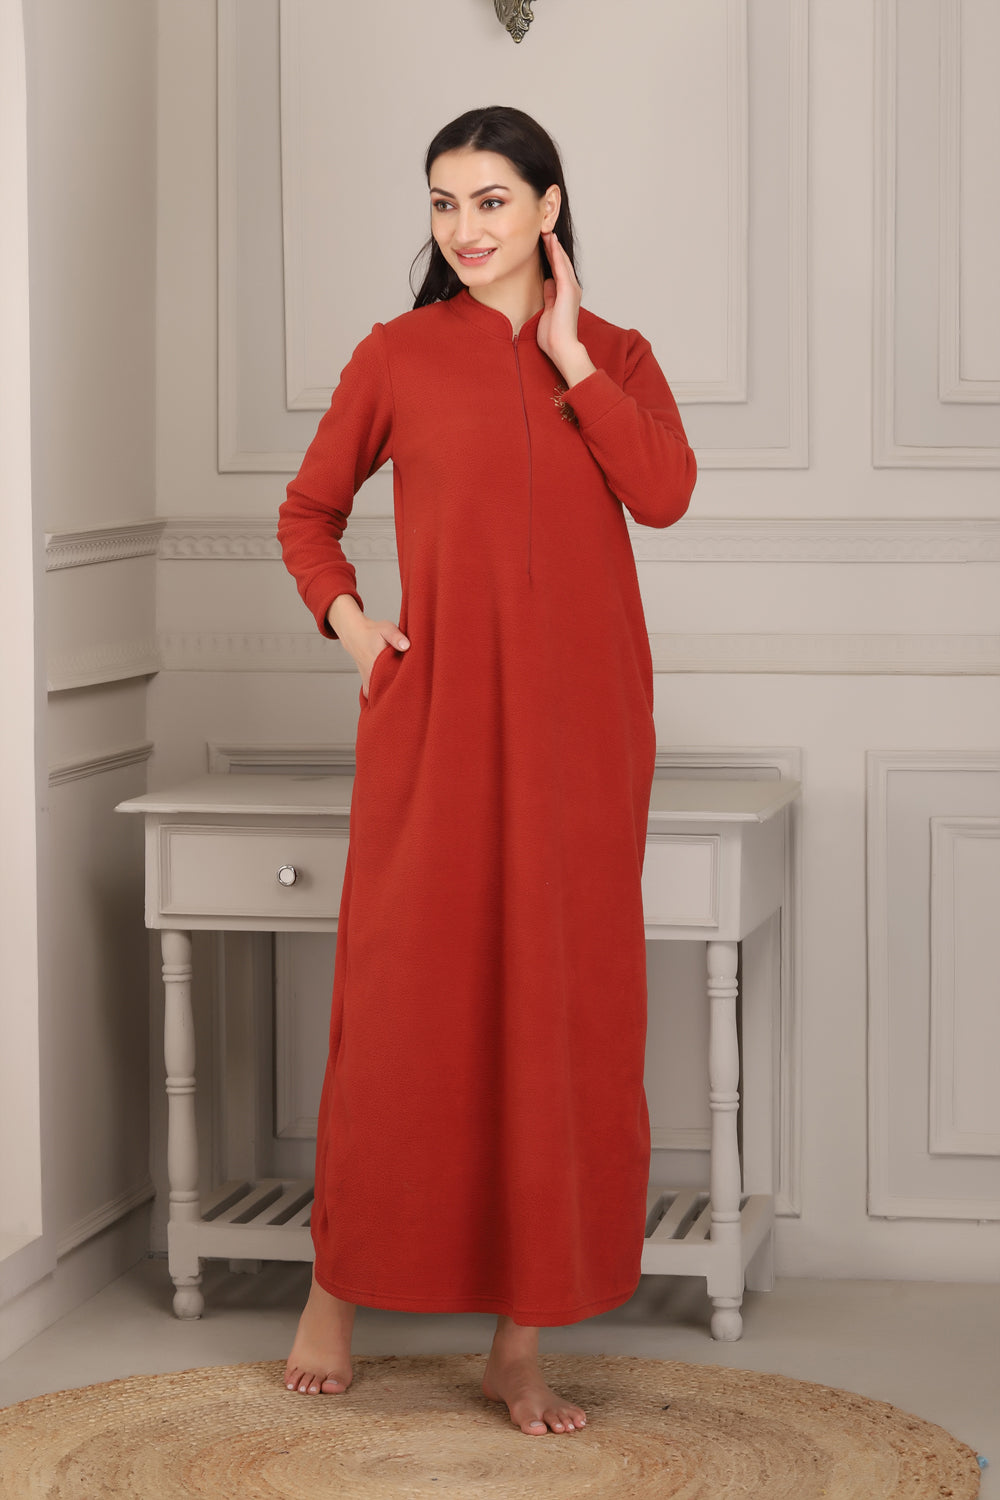 Snuggle with a snowflake cozy lounging polar nightie Private Lives